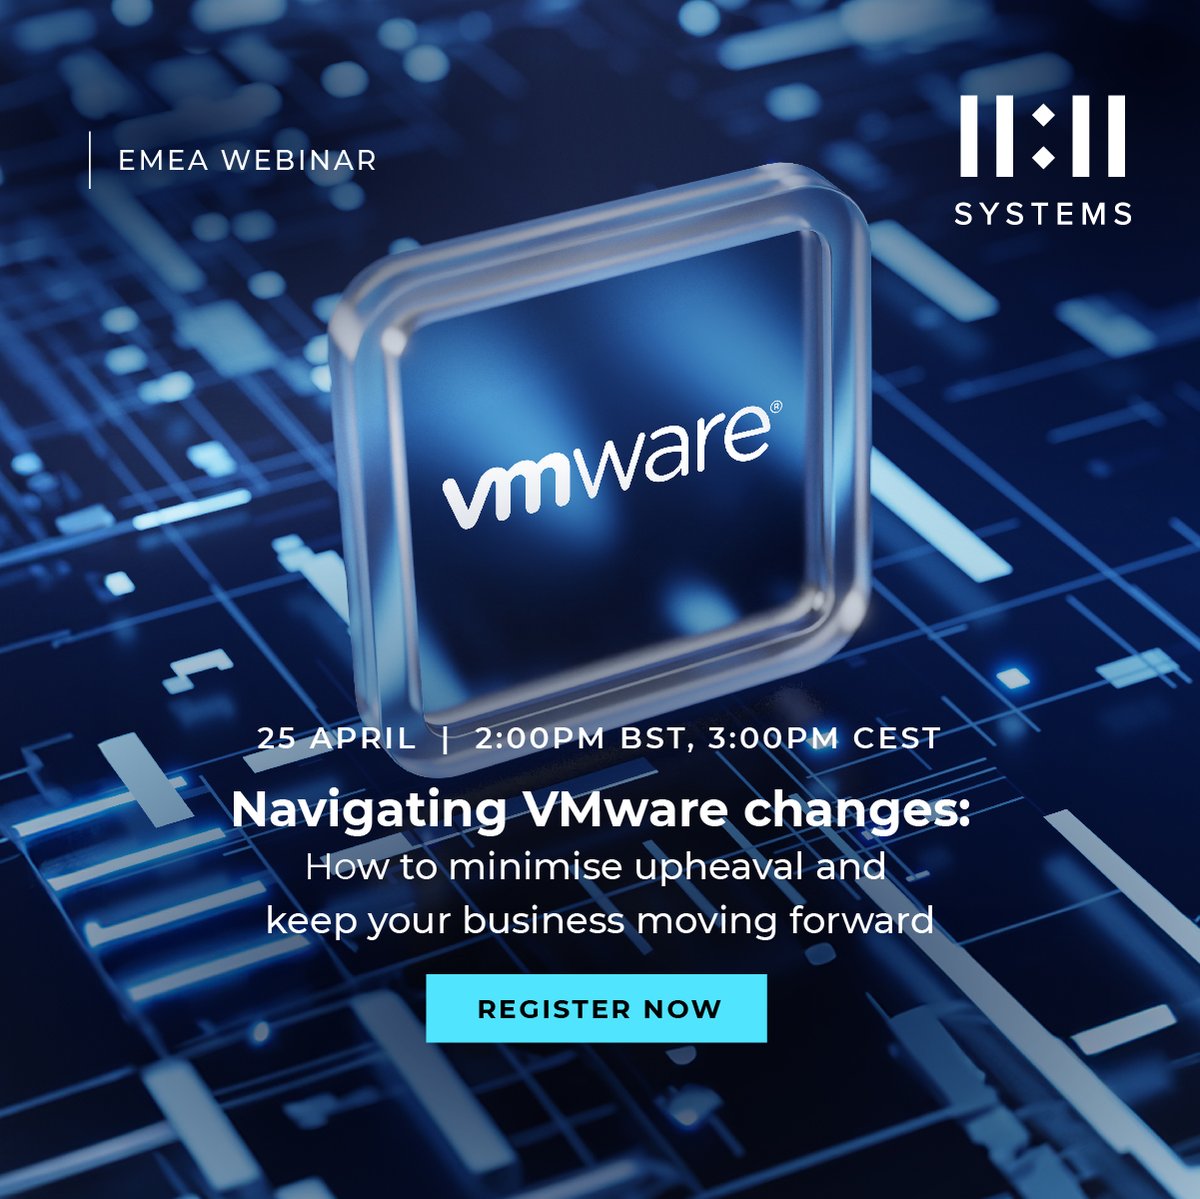 If your business is unprepared for the changes brought about by Broadcom’s recent acquisition of VMware, we can help. Join us on Thursday, 25 April at 2:00 PM BST / 3:00 PM CEST to learn more. Register for the EMEA session: 1111systems.com/wb-apr-vmware-…